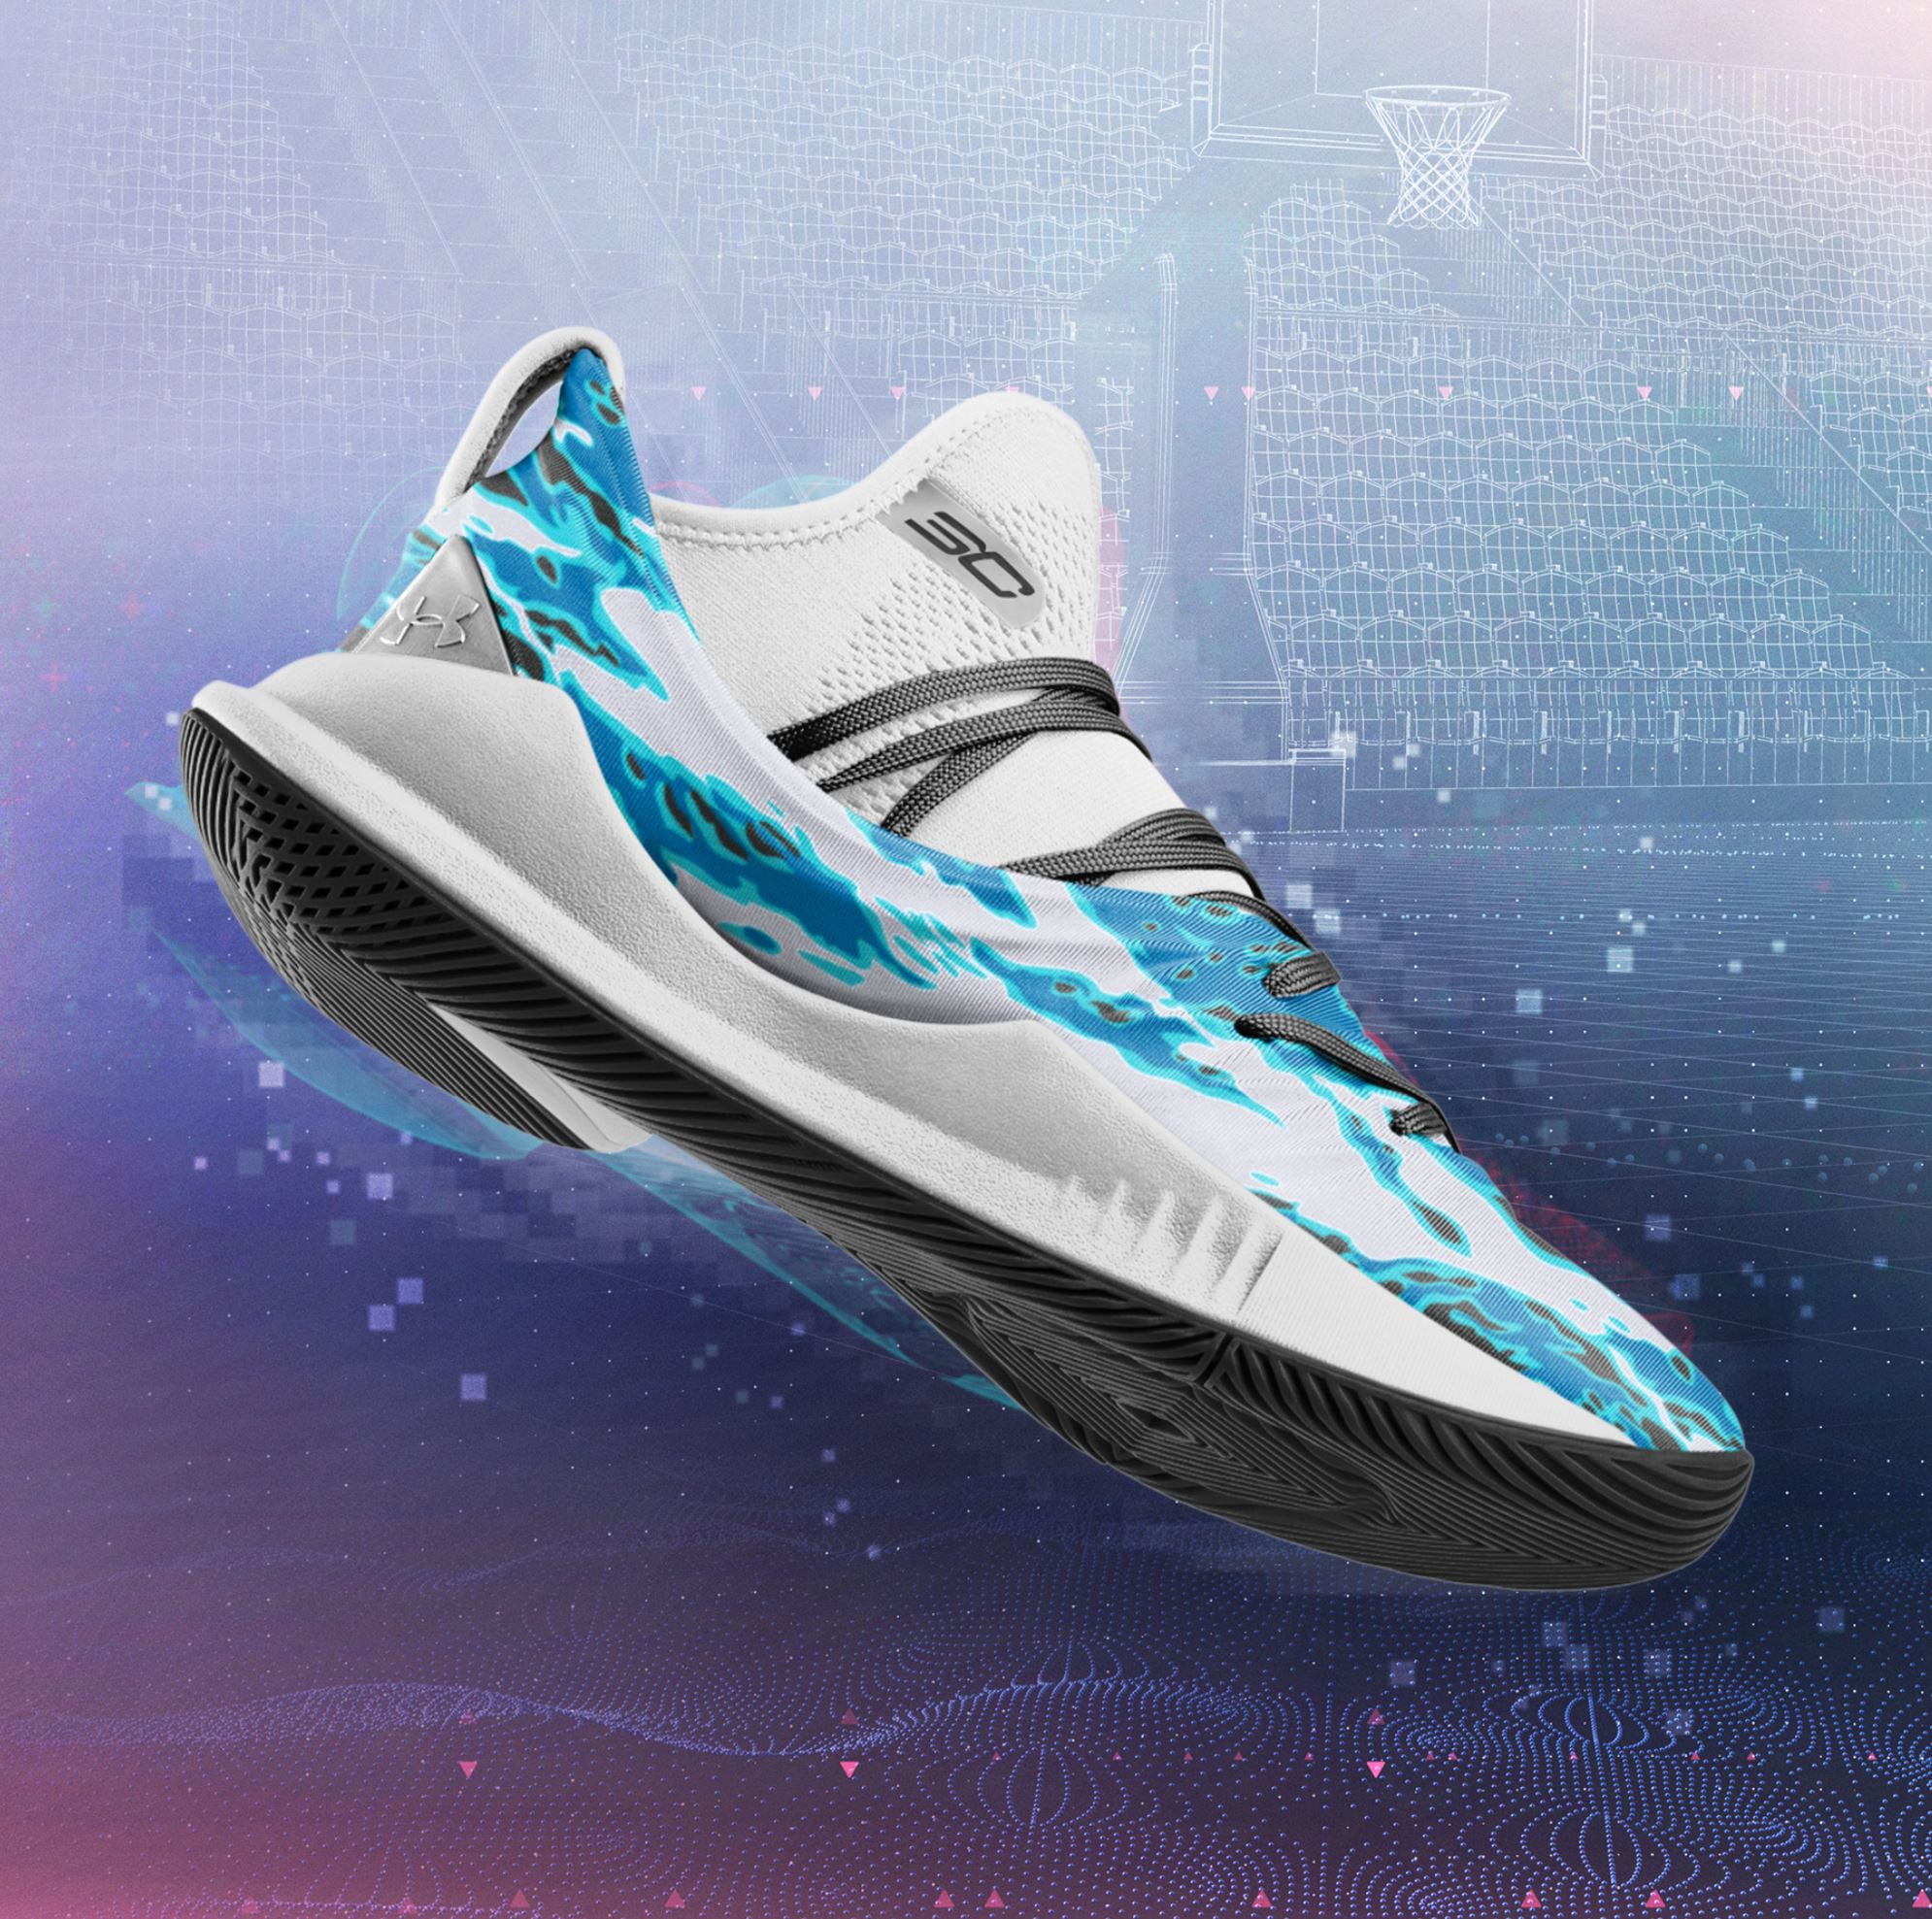 arbusto Caballo Cordelia You Can Now Customize the Curry 5 on ICON - WearTesters